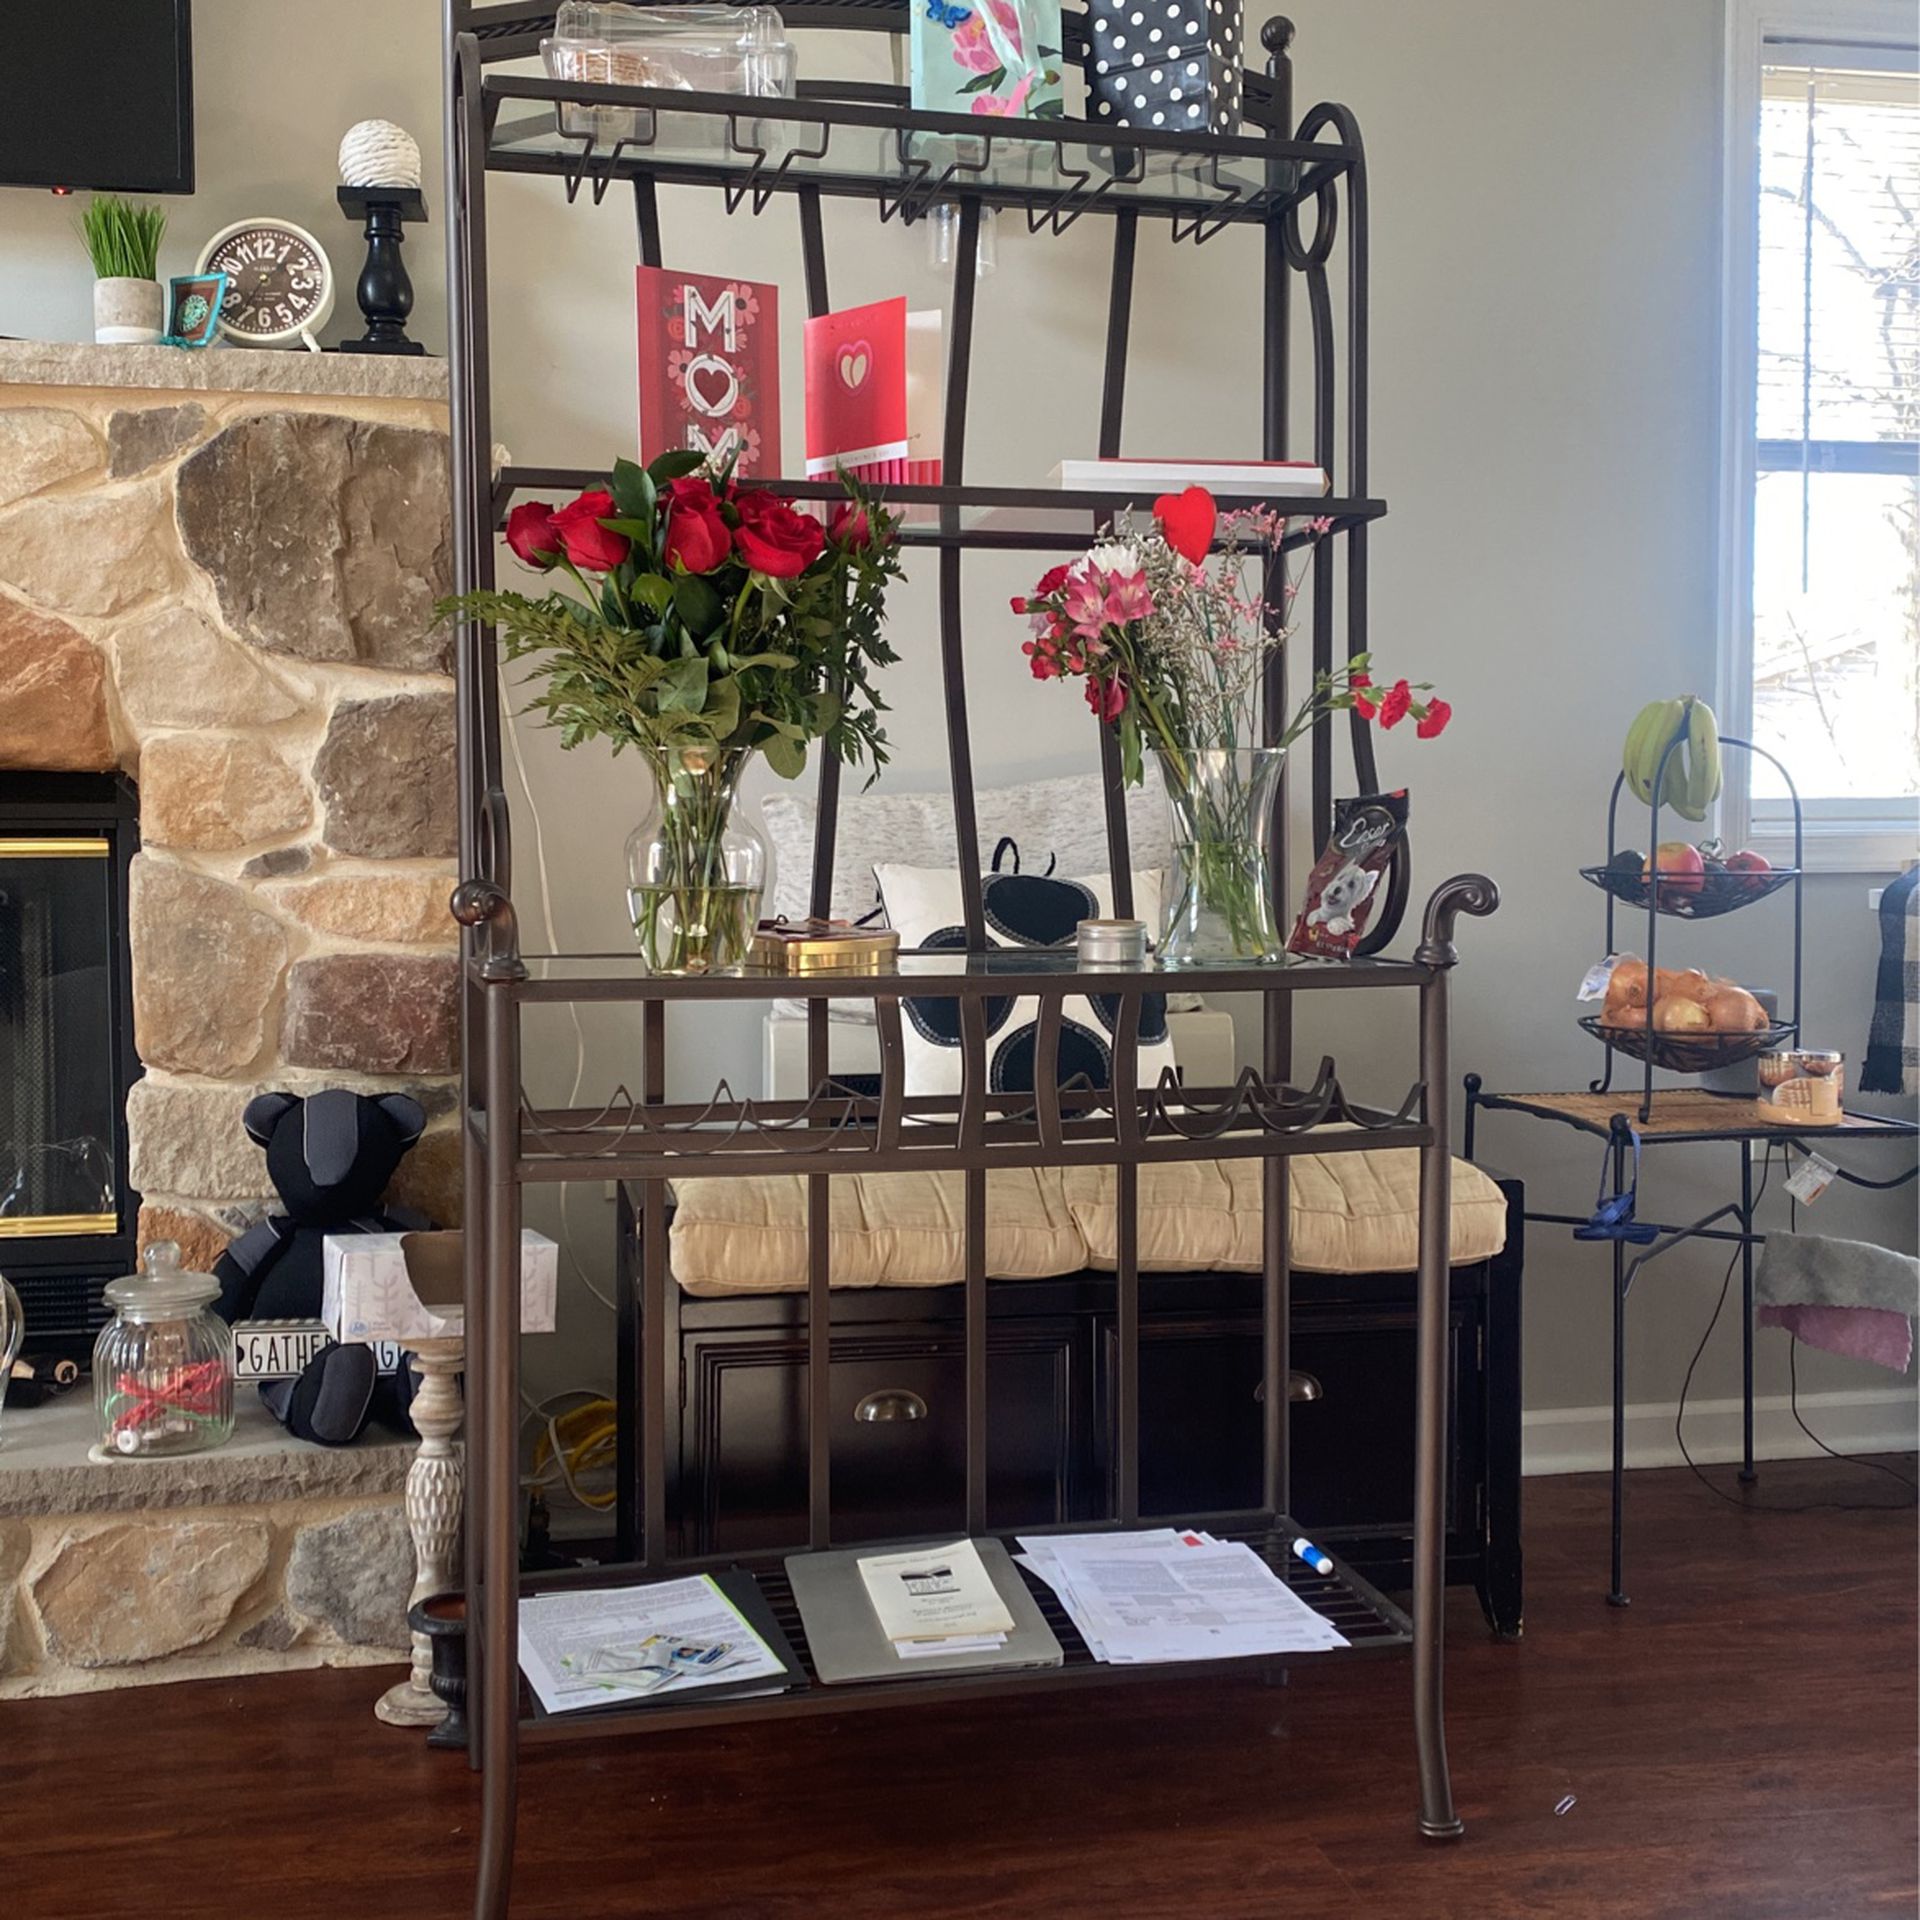 Gorgeous Glass Shelves And Iron Bakers Rack/coffee bar